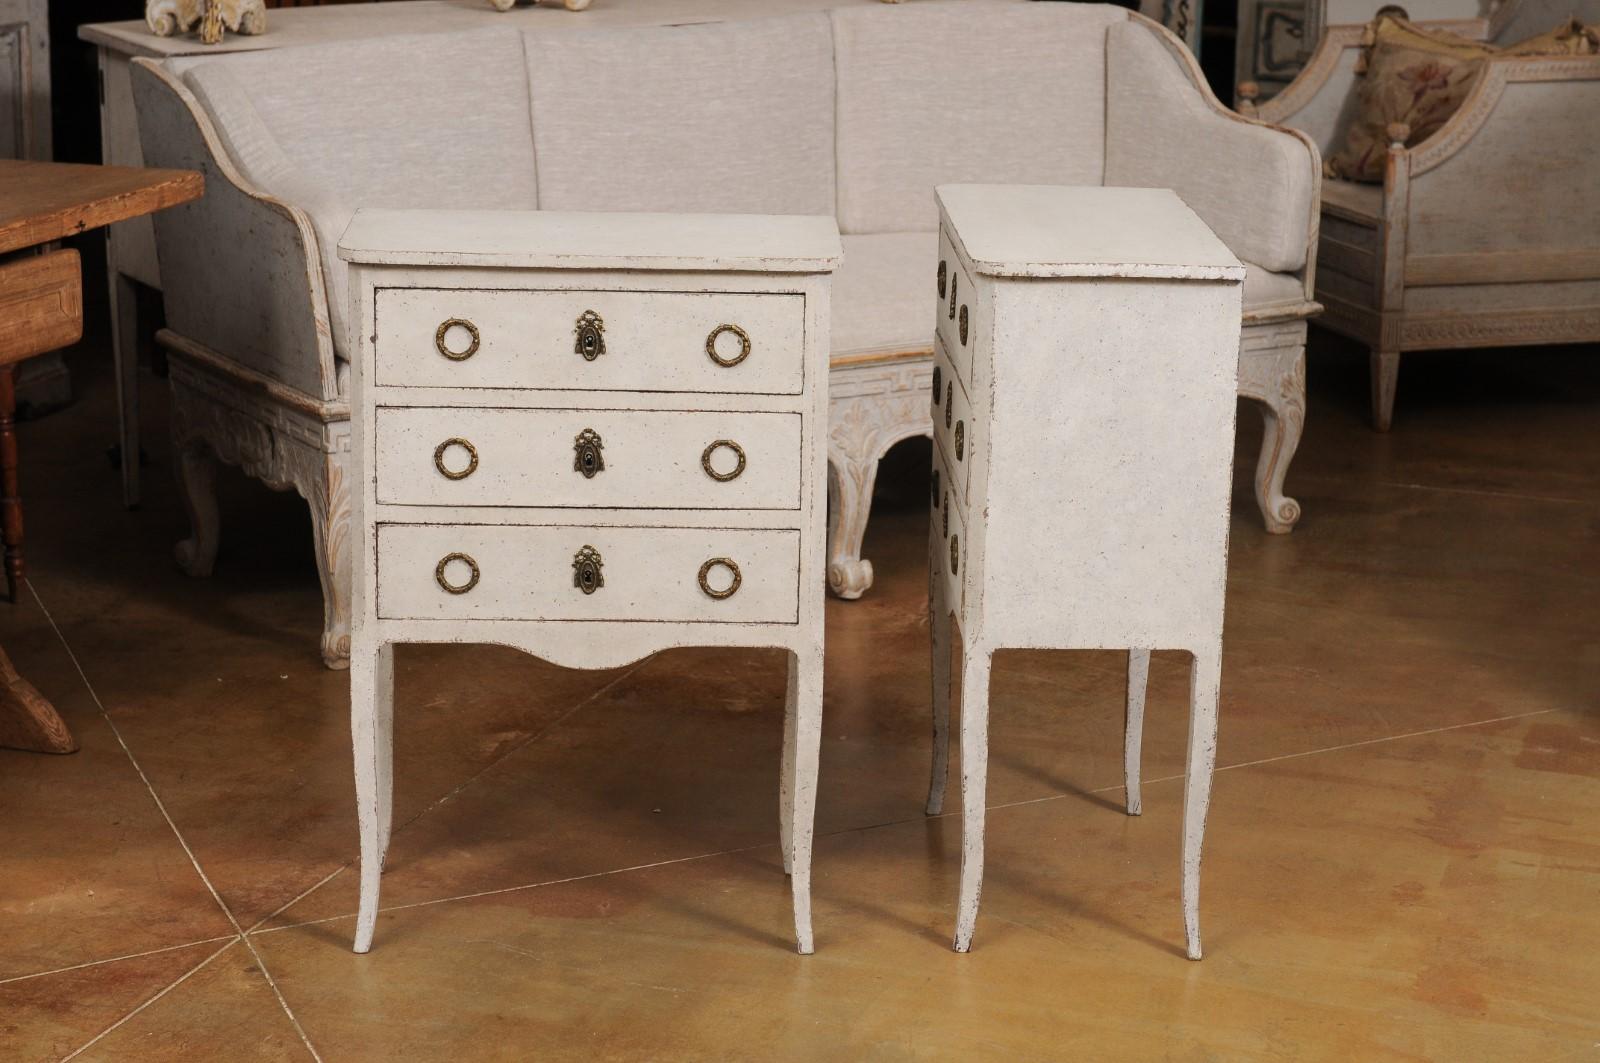 Carved Swedish Gray Painted Bedside Tables with Three Drawers and Cabriole Legs, a Pair